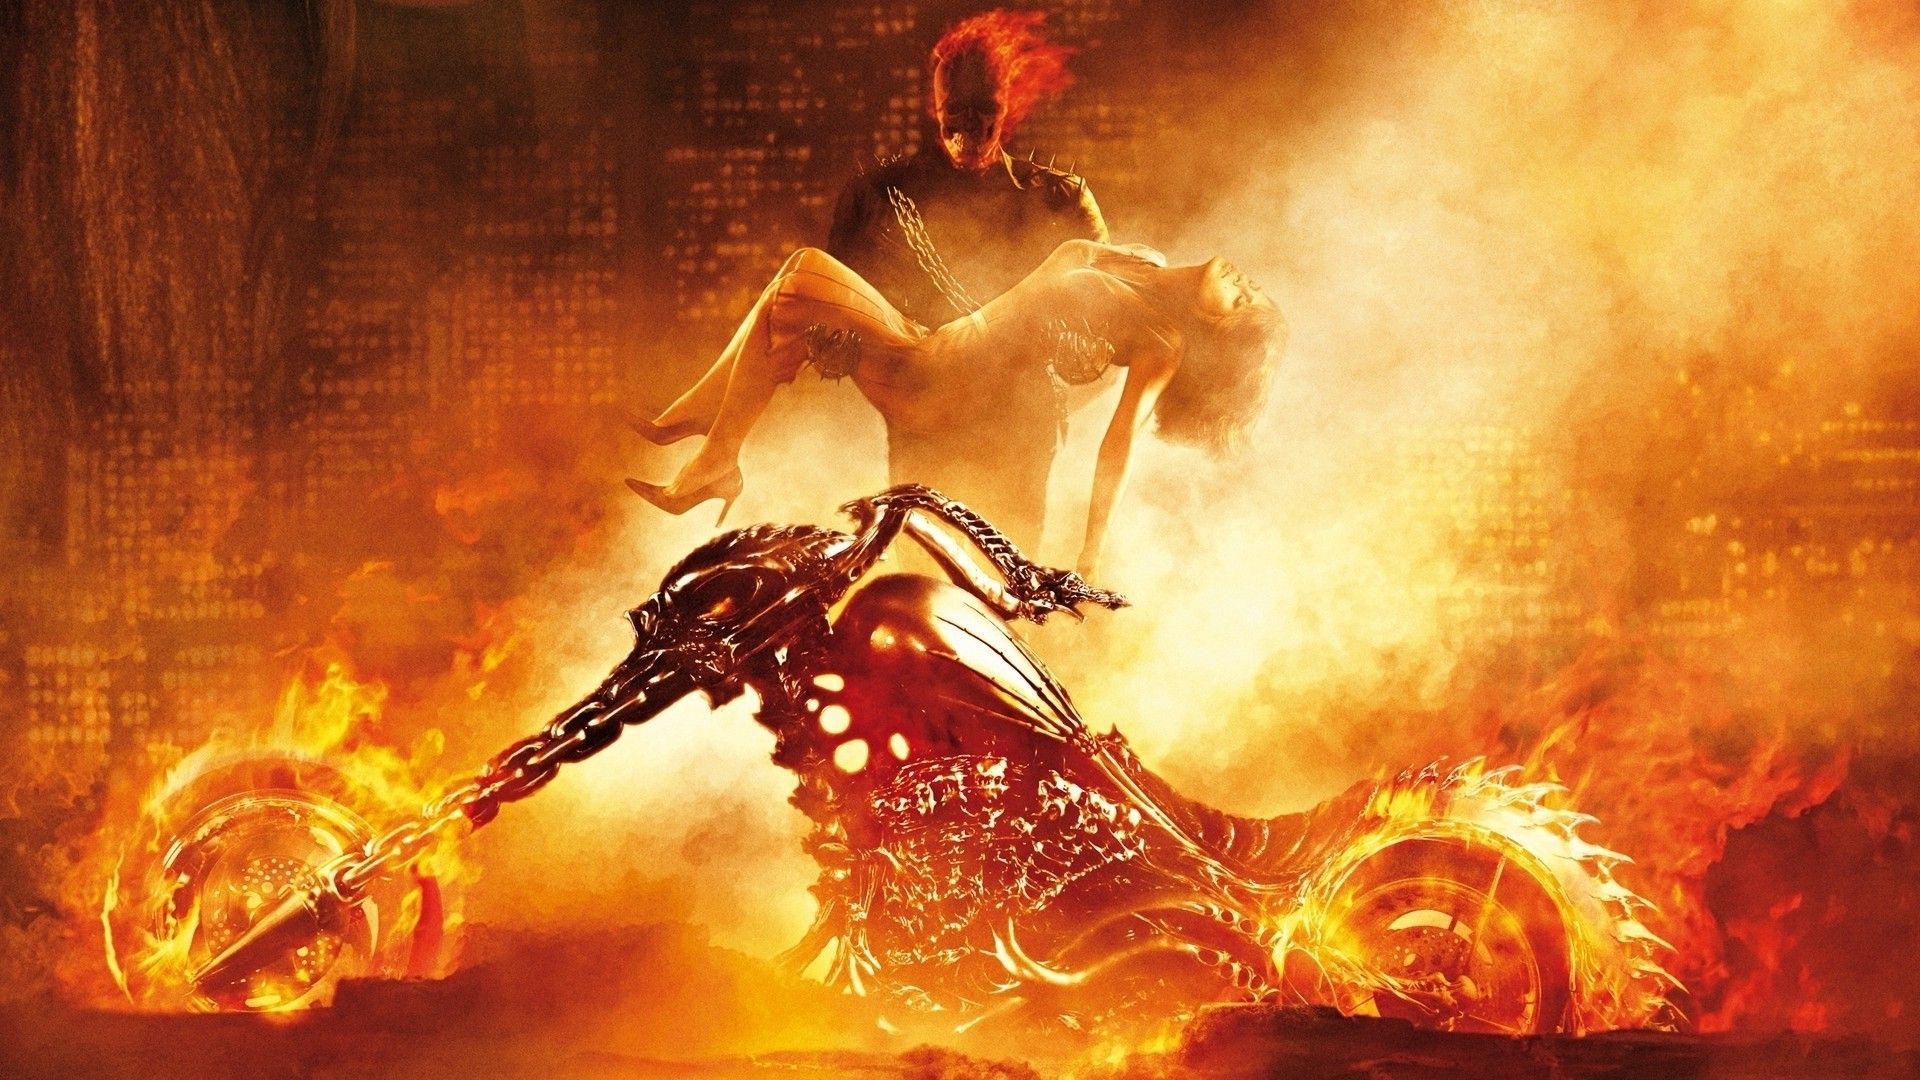 Ghost Rider HD Wallpaper For Pc